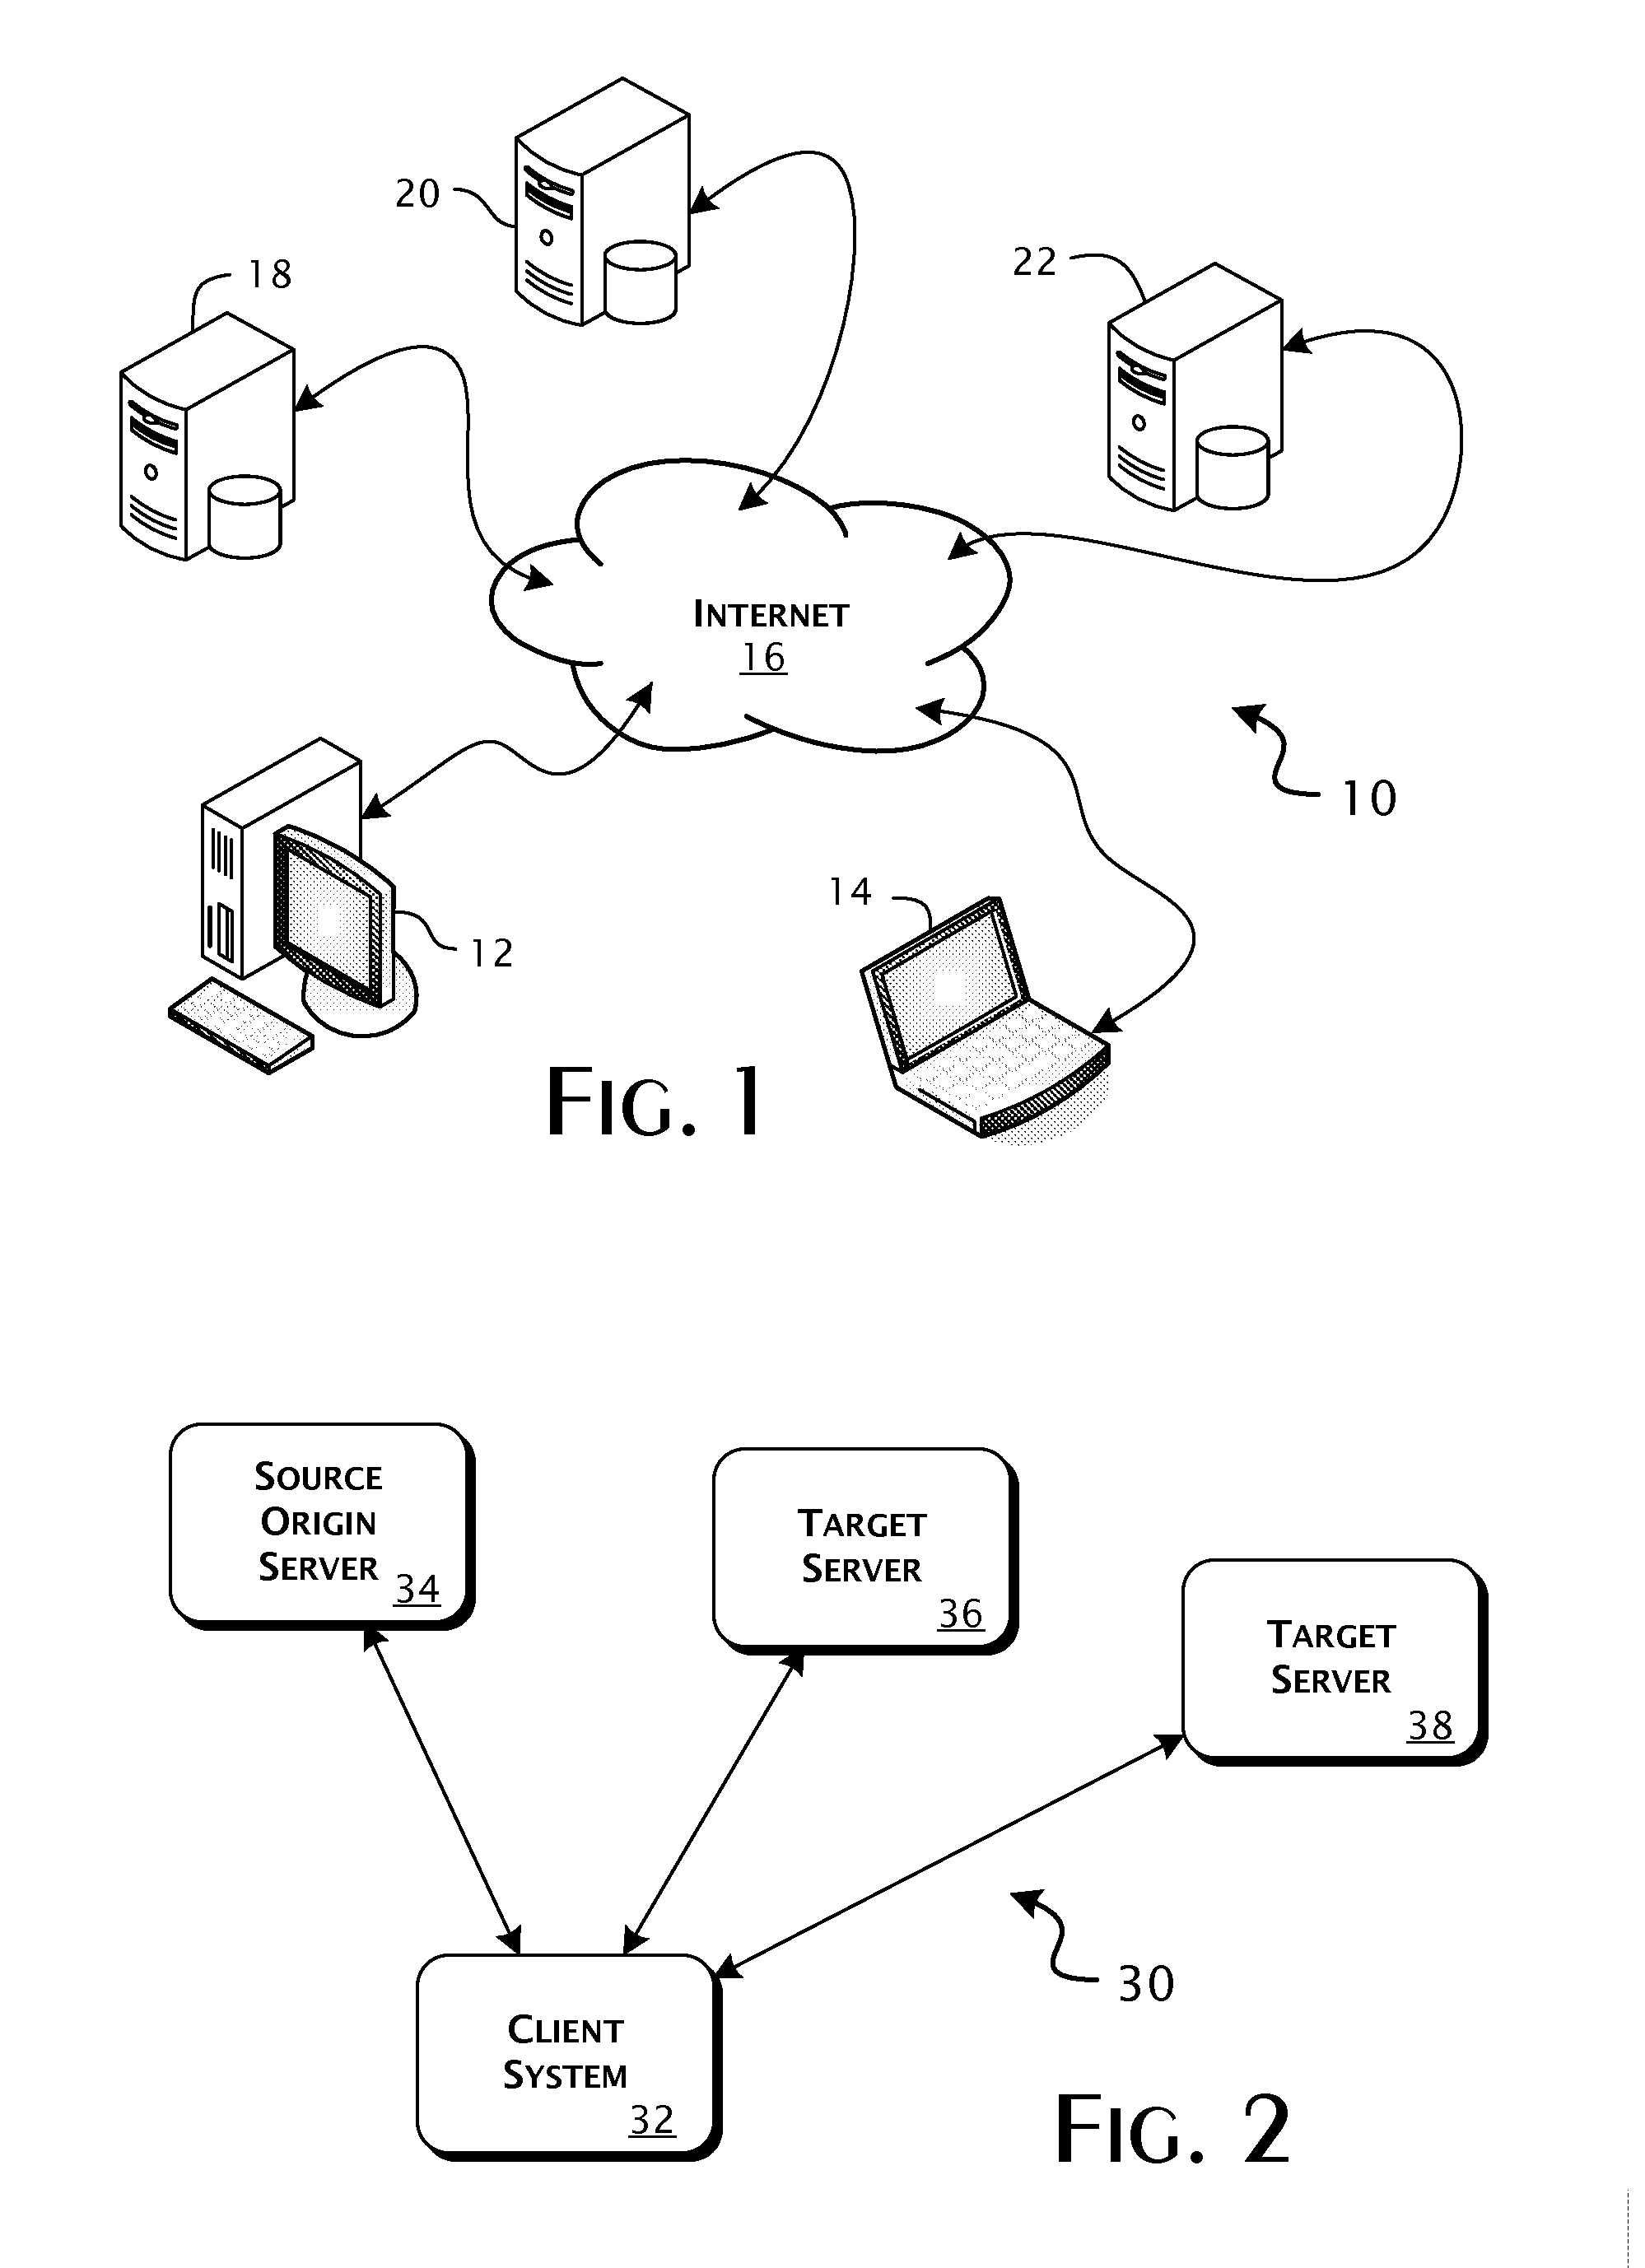 Enterprise client-server system and methods of providing web application support through distributed emulation of websocket communications